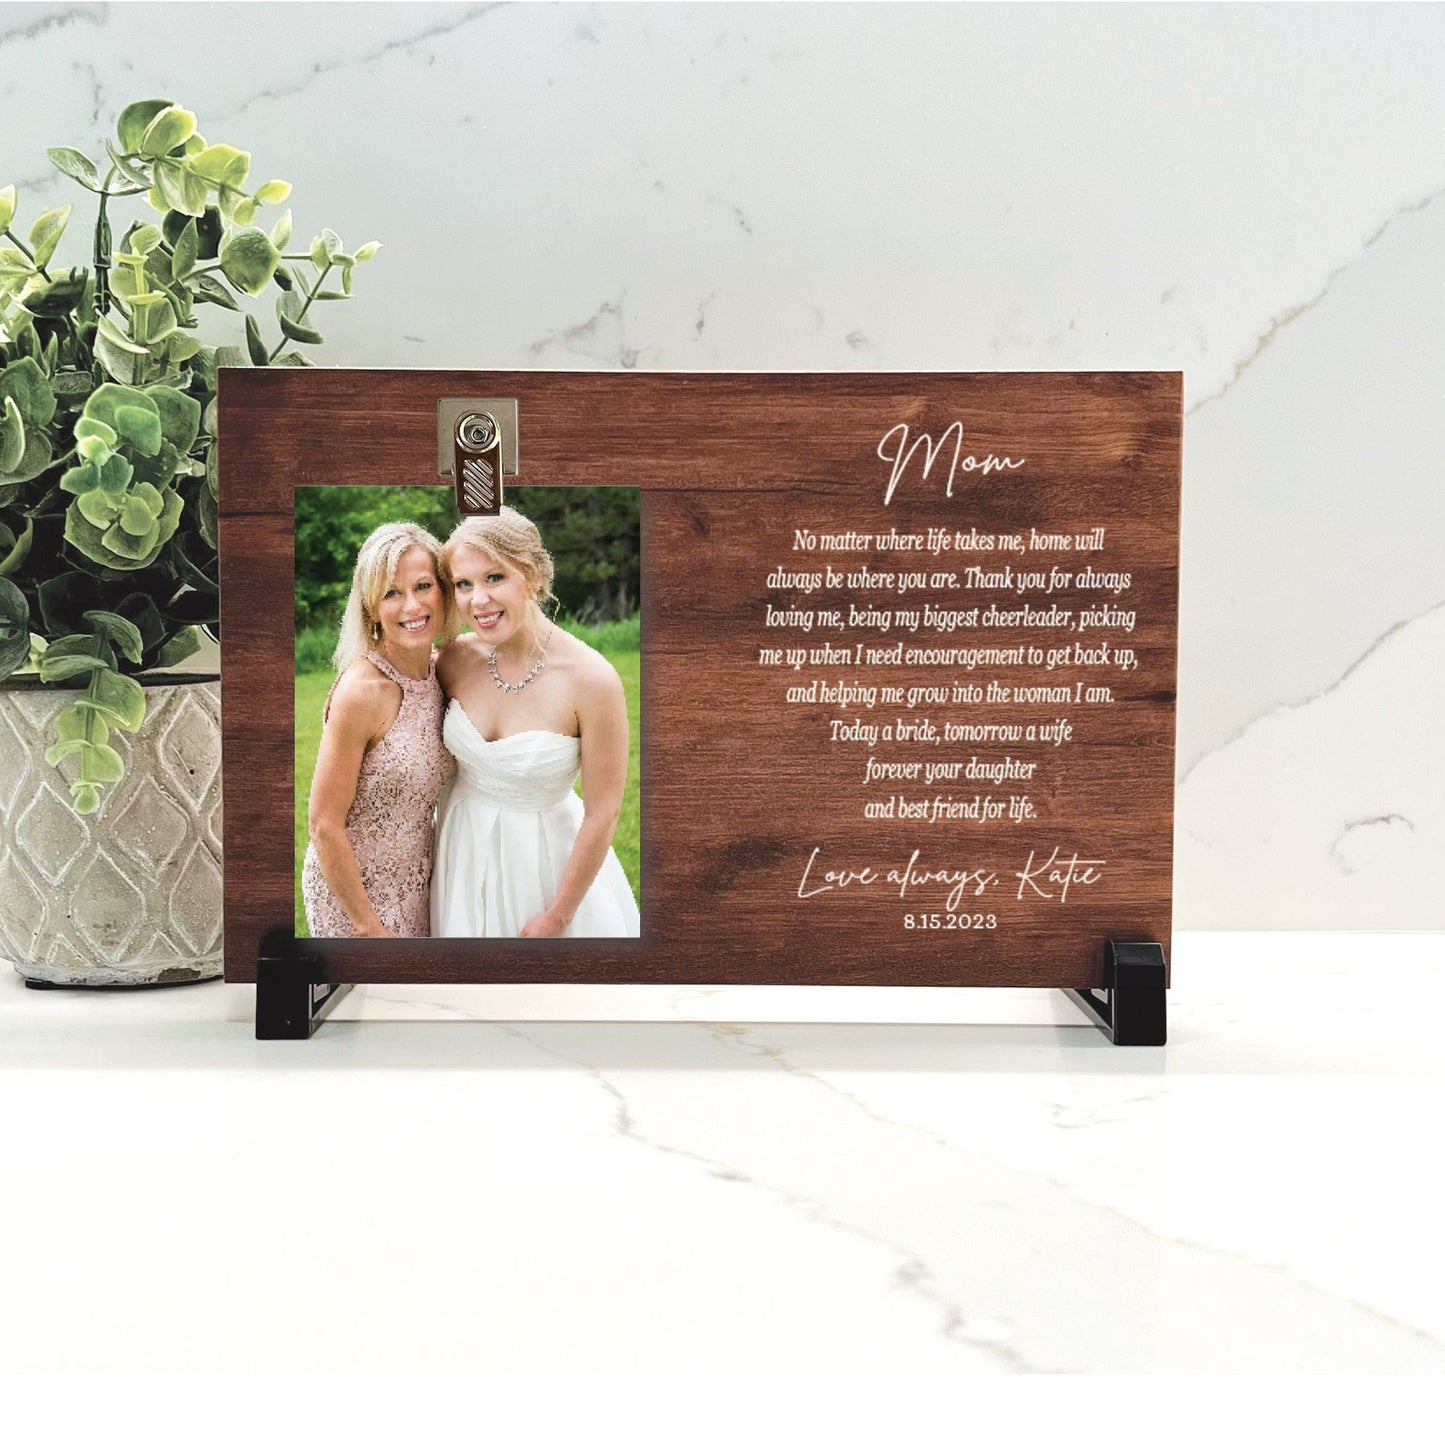 Mother of the Bride Gift from Bride, Wedding Gift Mom, Mother of the Bride Picture Frame, Mother of the Bride Gift Poem, Background Choice